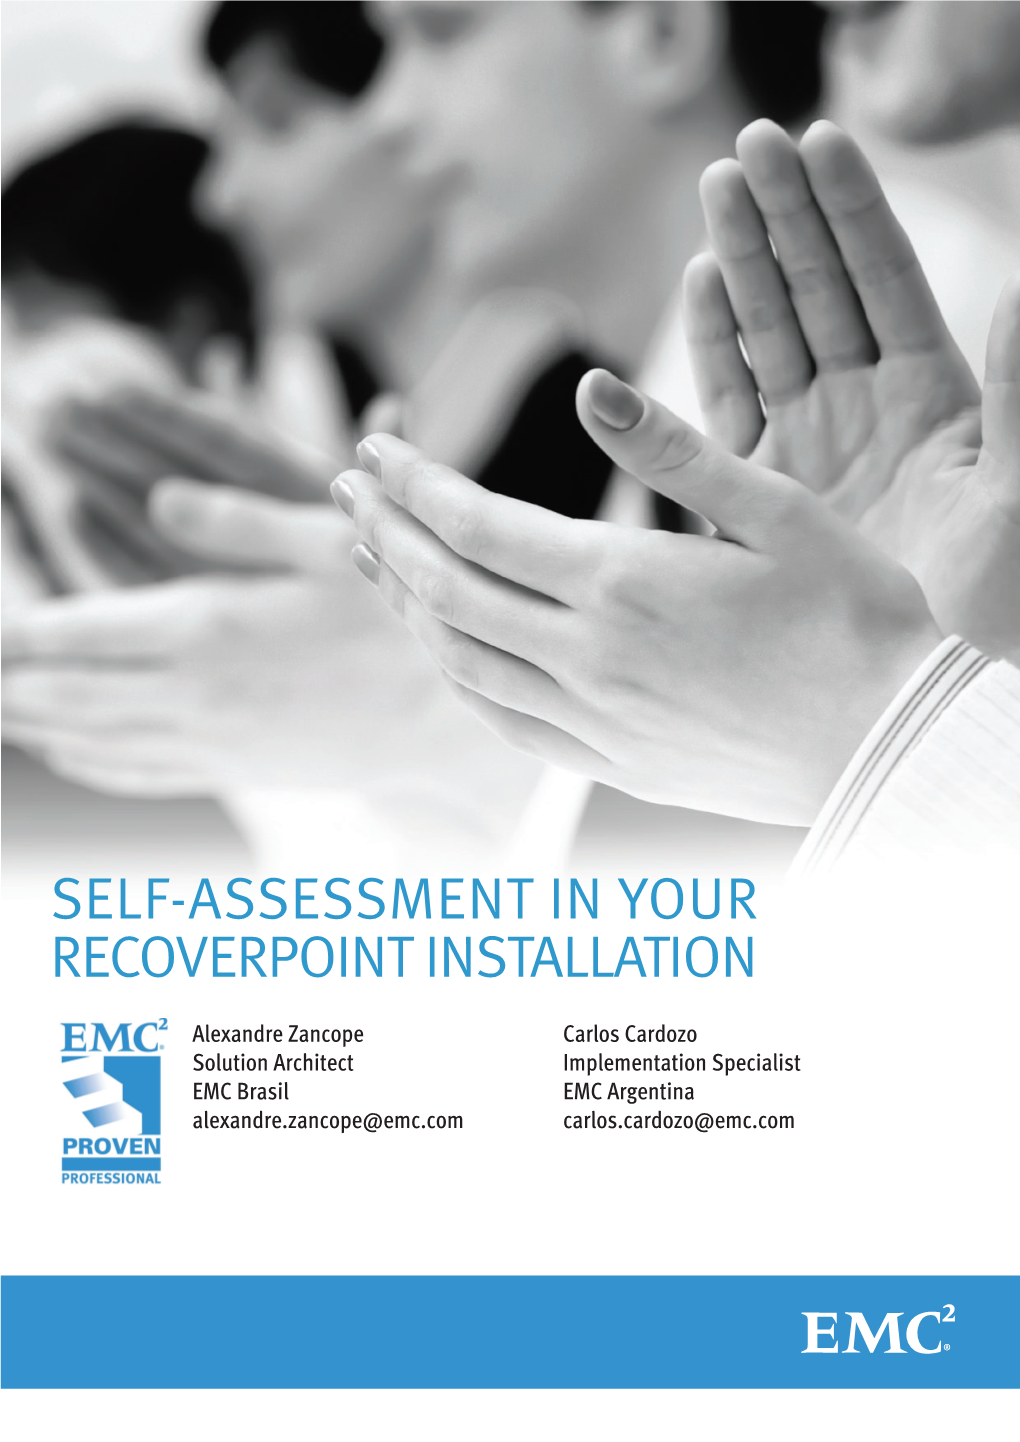 Self-Assessment in Your Recoverpoint Installation